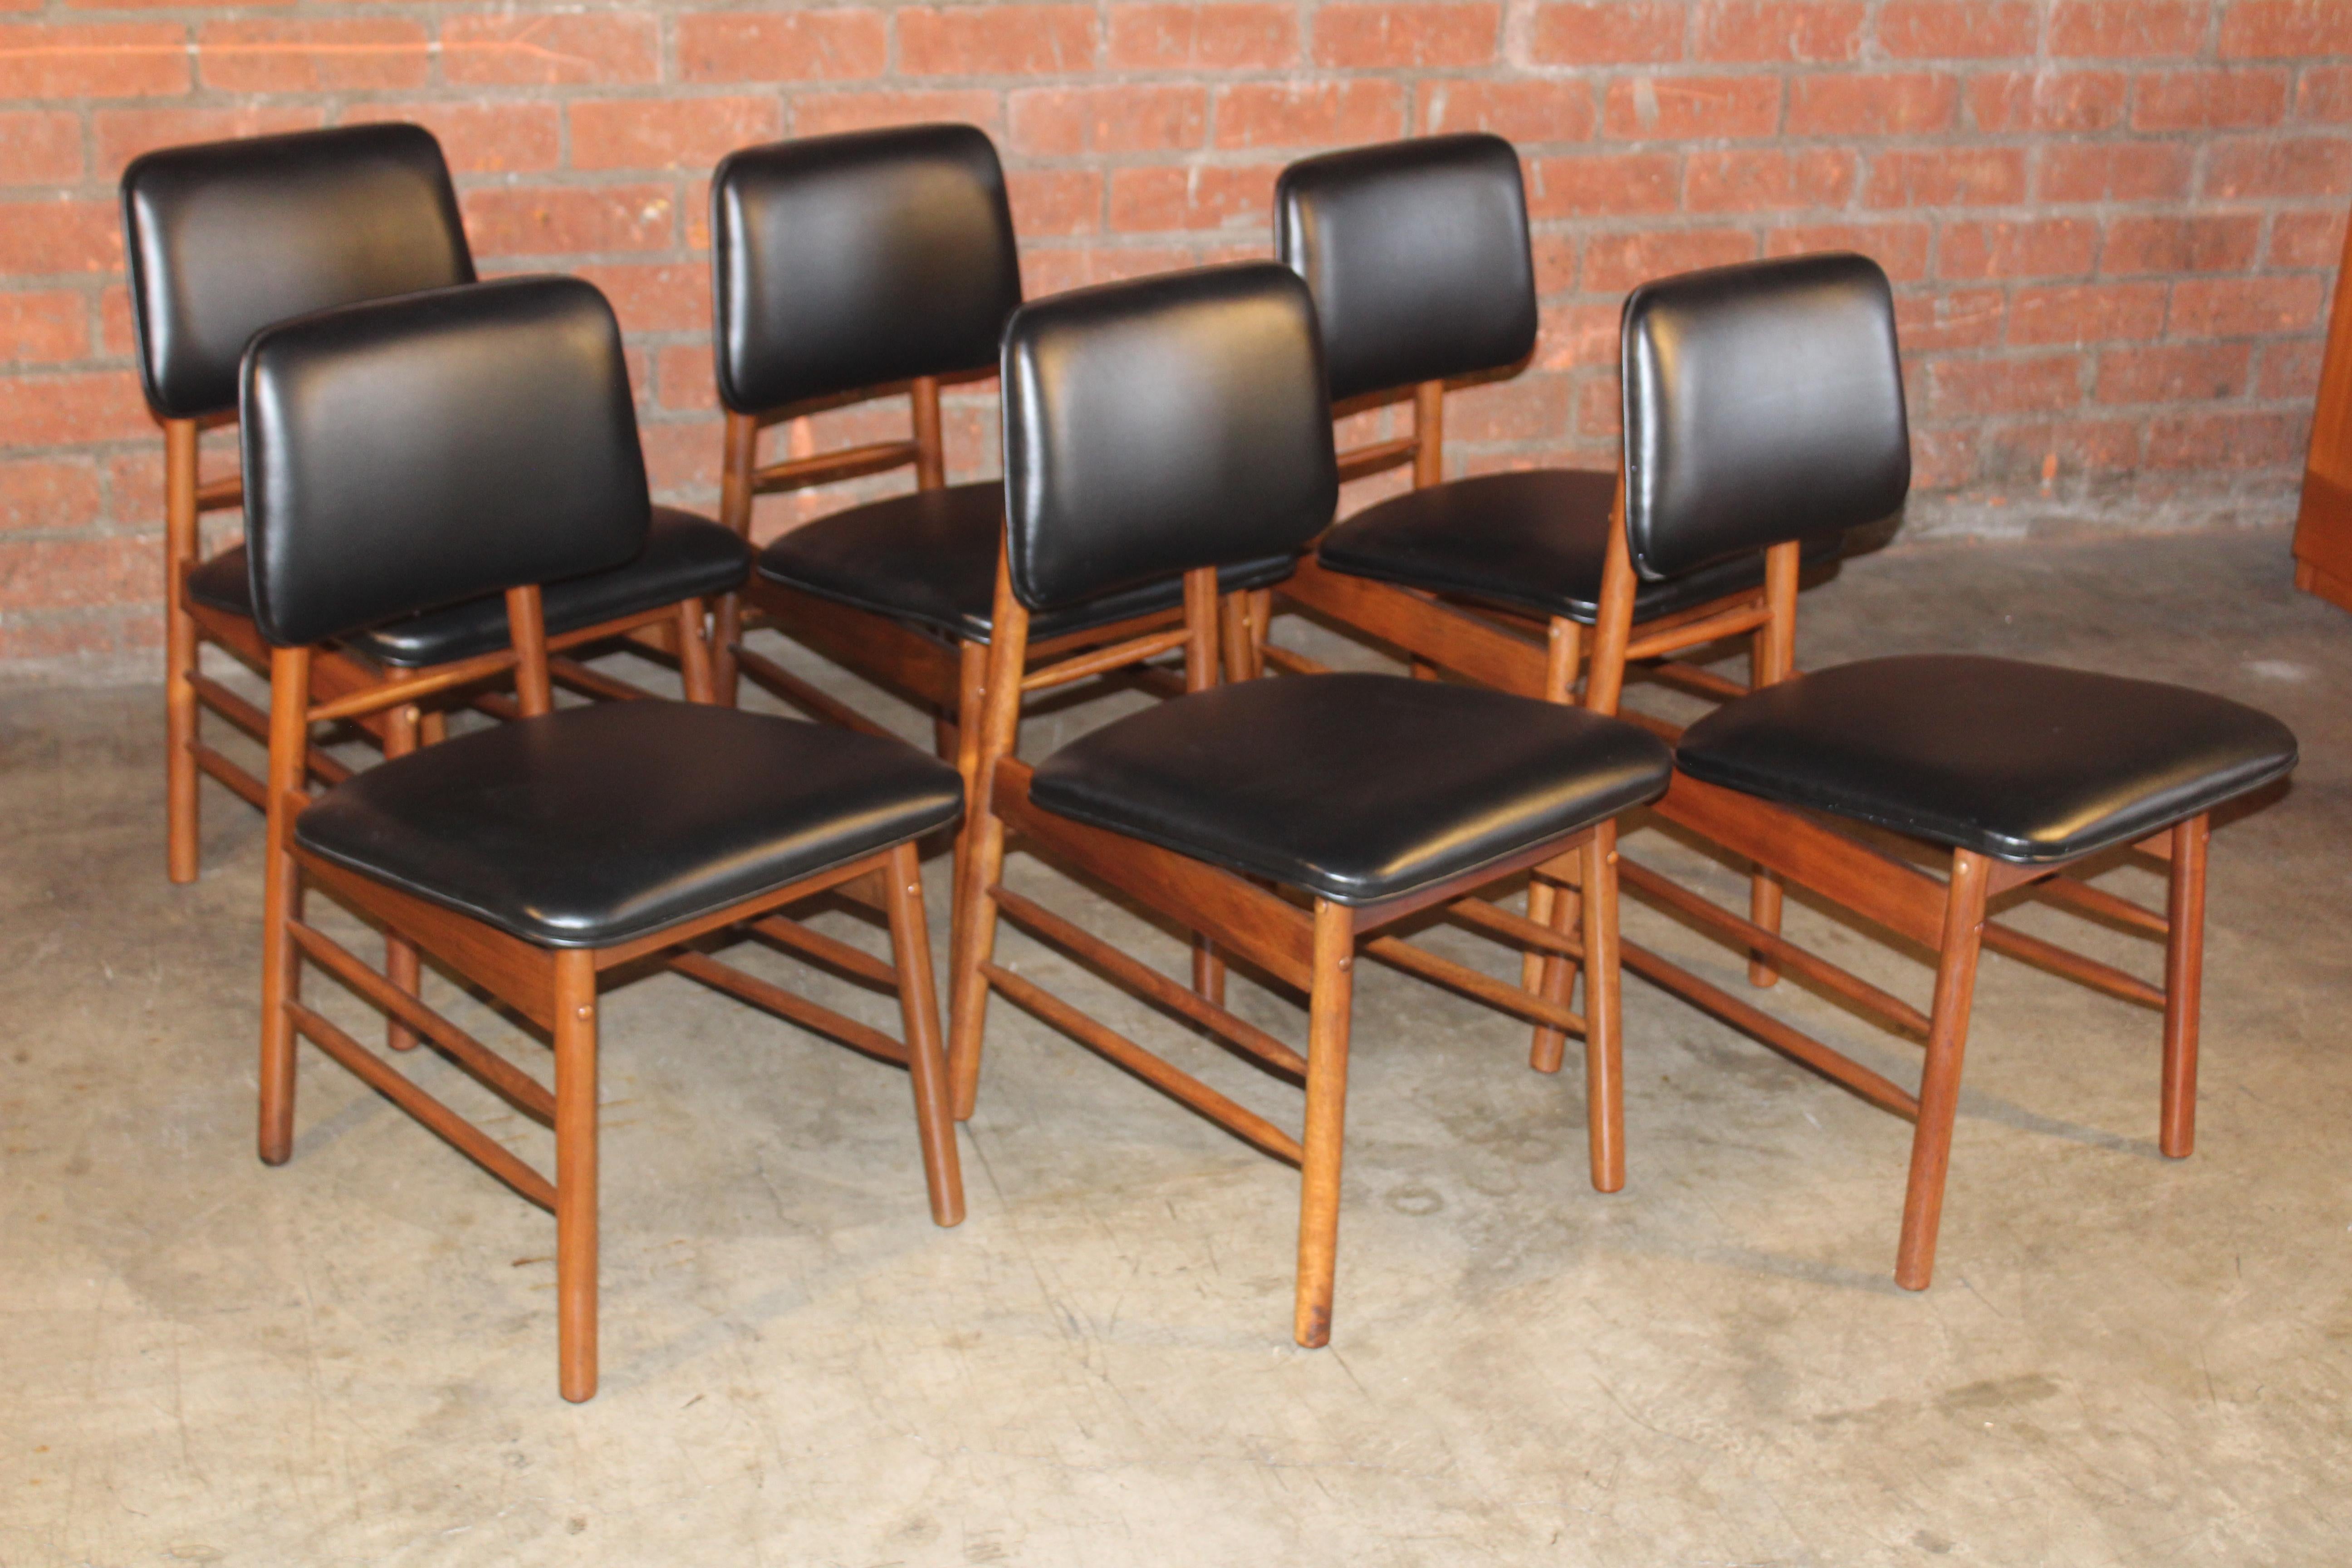 American Set of Six Dining Chairs by Greta Grossman, 1950s For Sale